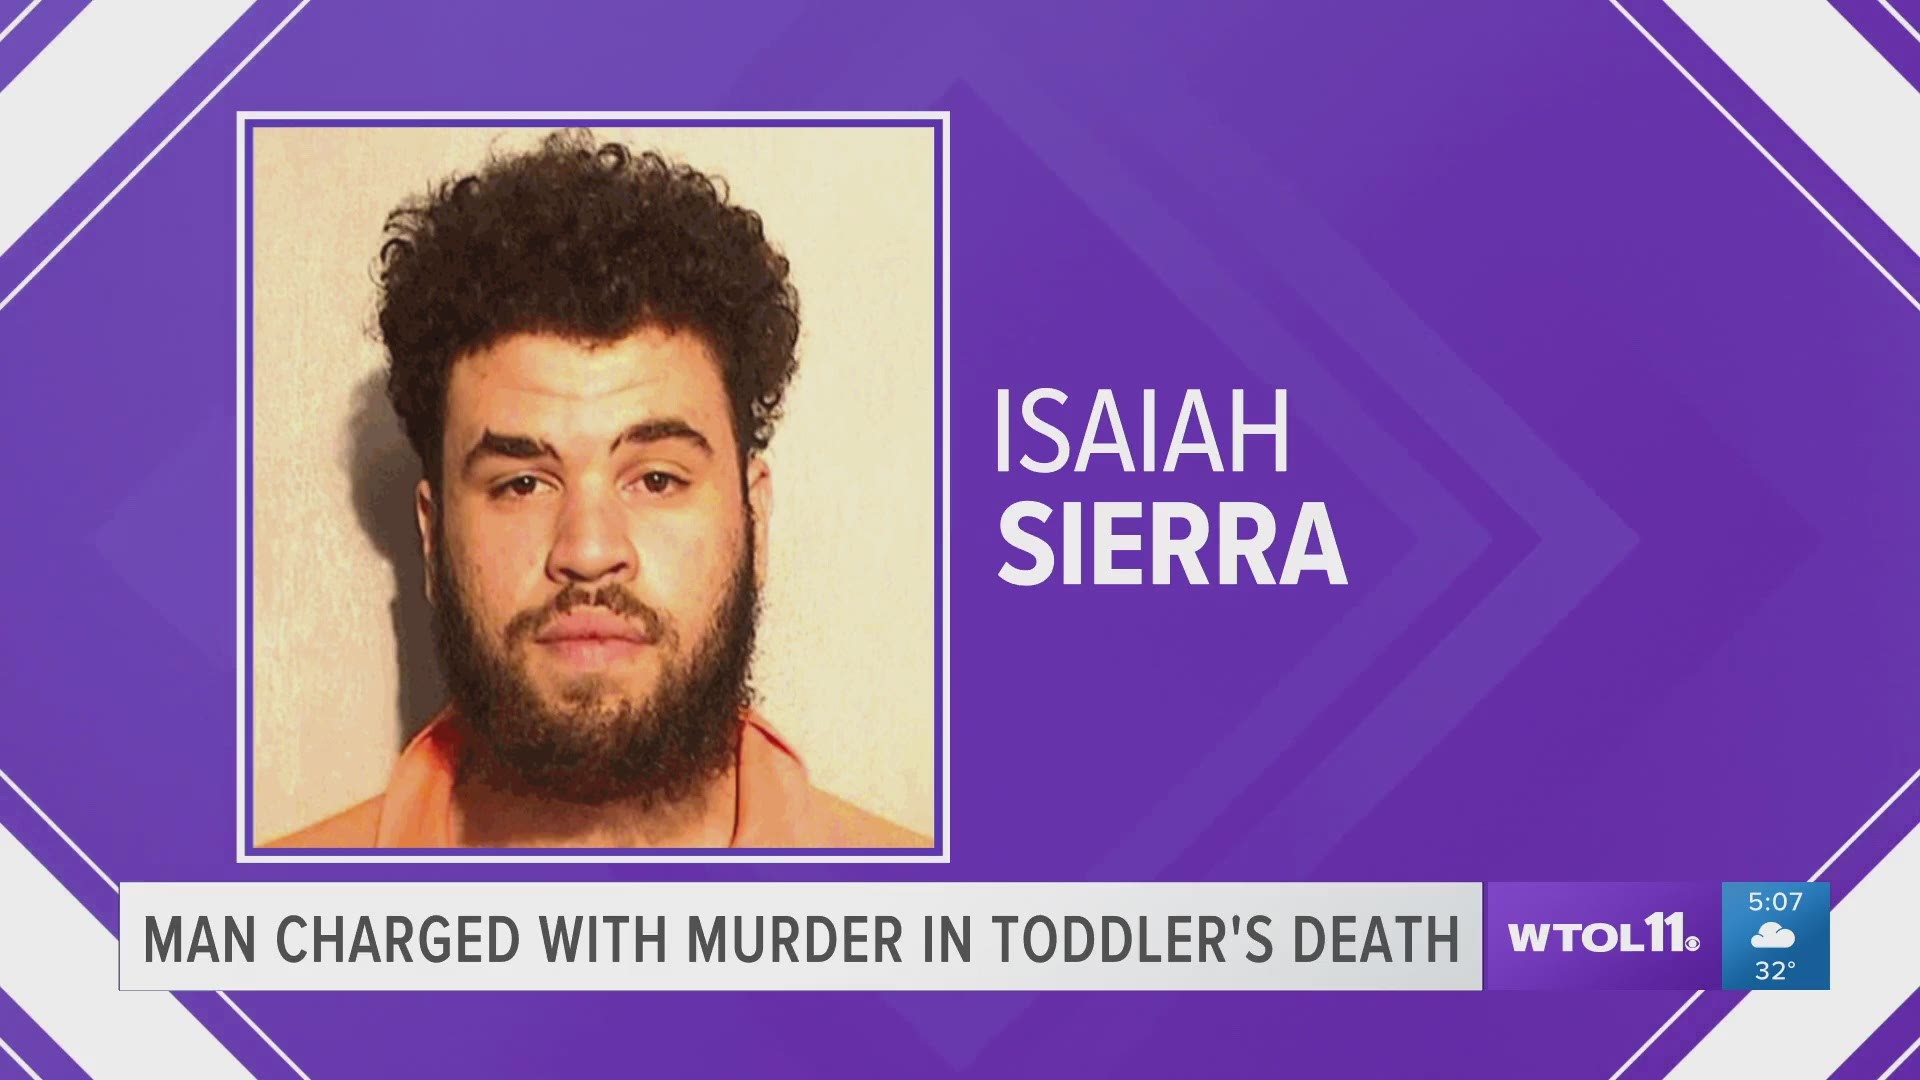 Isaiah Sierra has been arrested and charged with murder after the girl died of injuries reported on Dec. 6. She sustained a fractured skull and detached retinas.